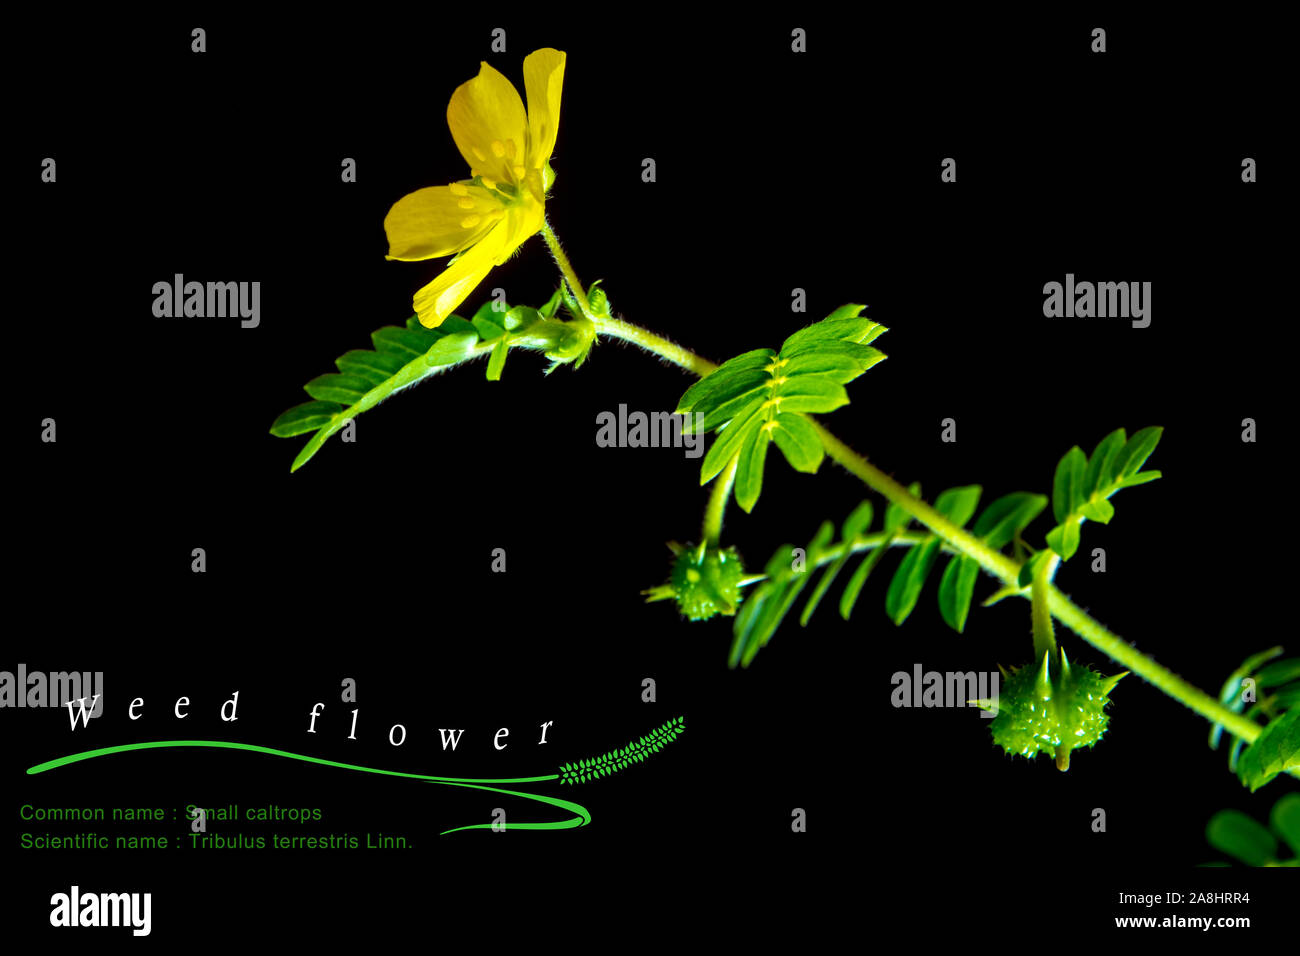 Yellow flower of small caltrops weed, isolated flower on black background with common and scientific name Stock Photo